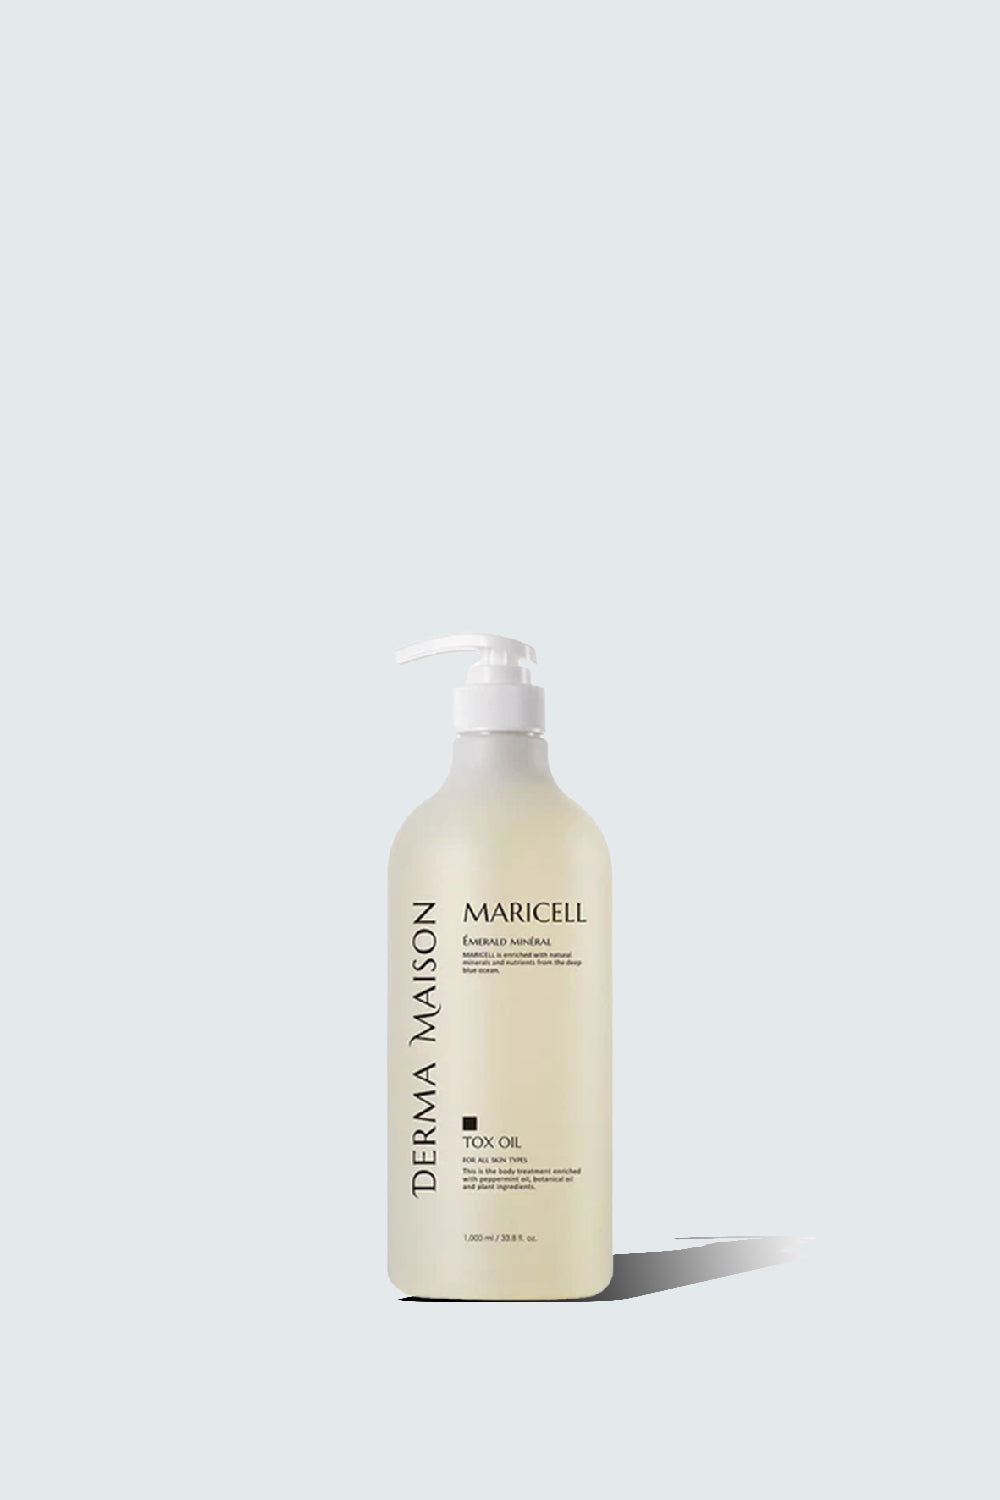 Maricell Tox Oil - 1,000ml [EXP. 2023/08/13] DERMA MAISON